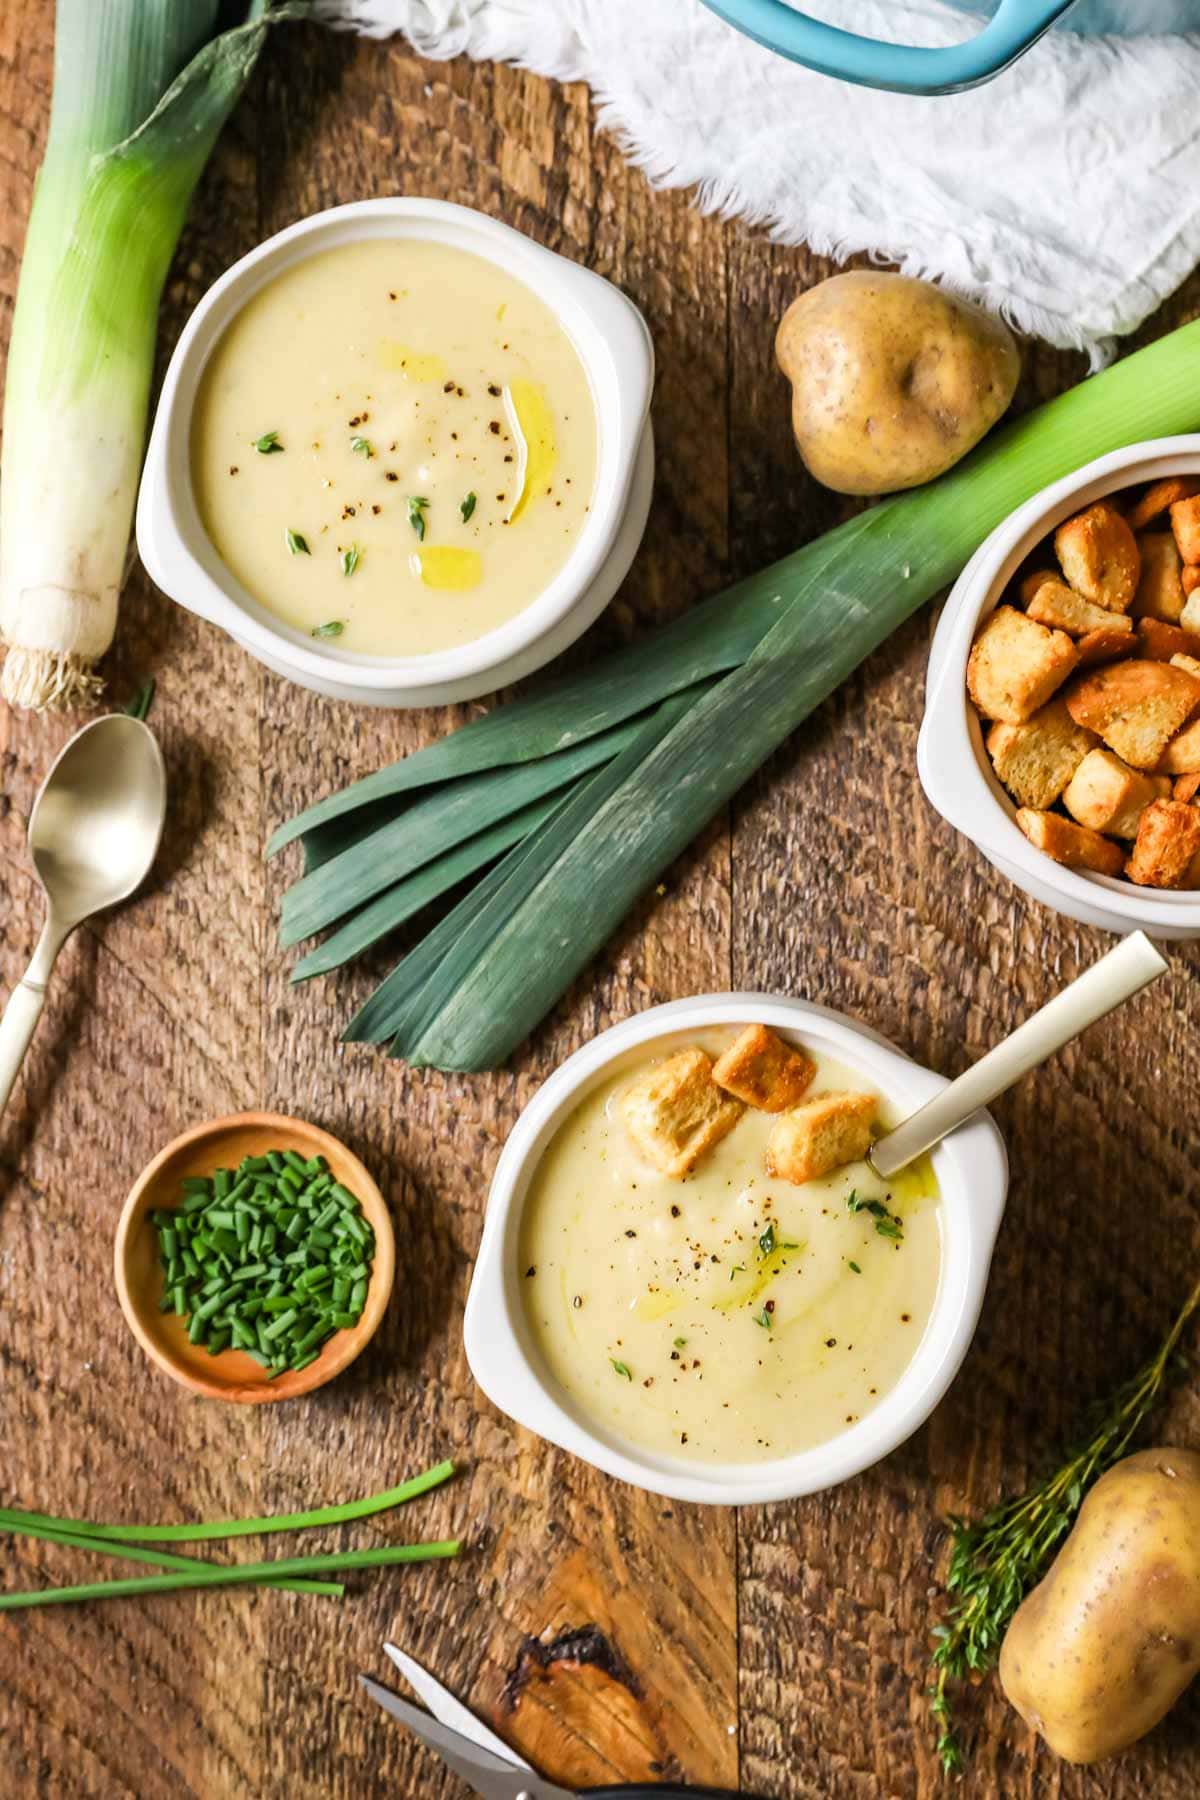 Overhead view of crocks of potato leek soup with leeks, chives, croutons, and potatoes surrounding them.